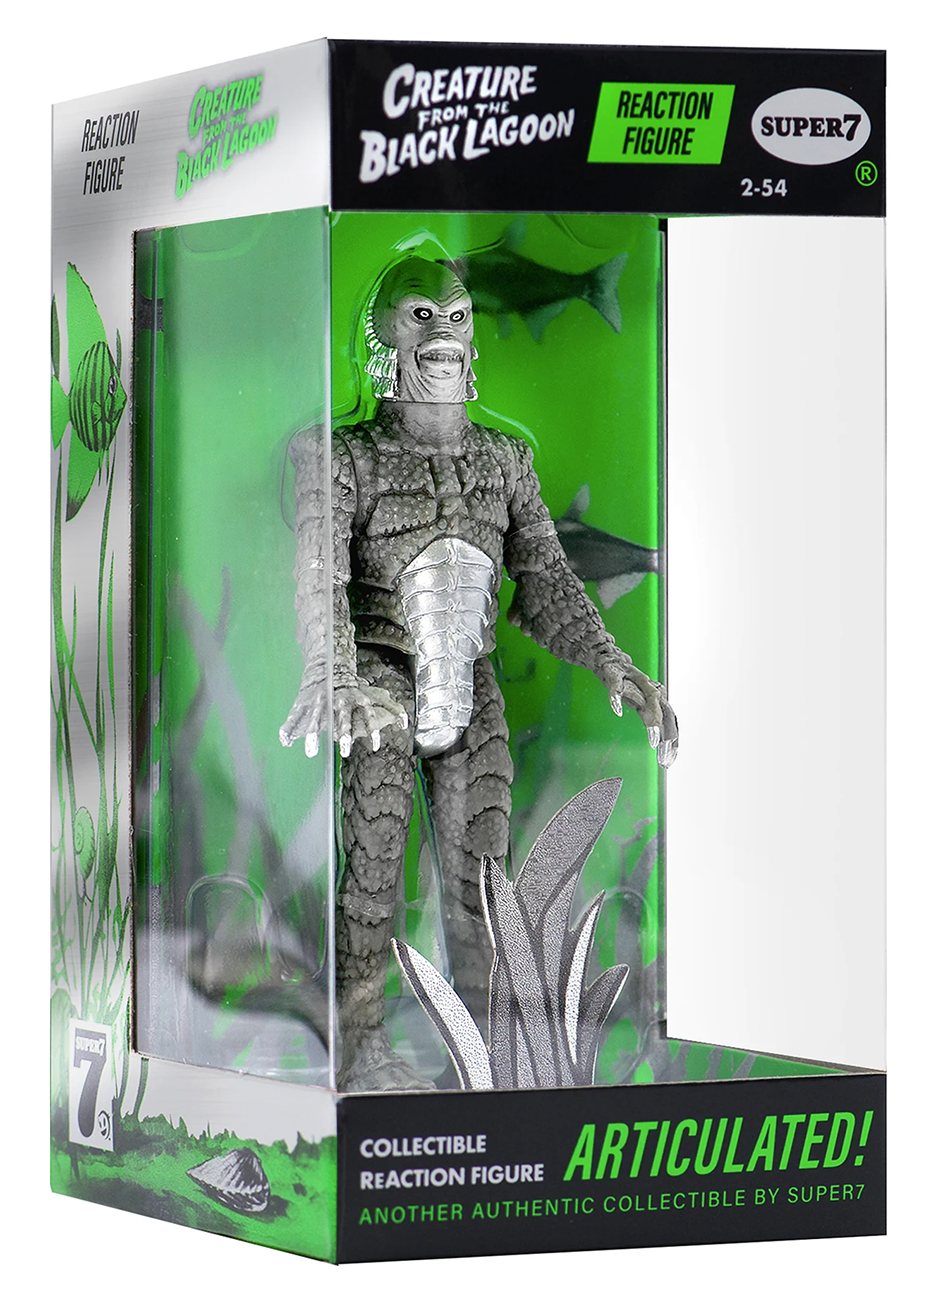 REACTION: CREATURE FROM THE BLACK LAGOON SILVER SCREEN EDITION